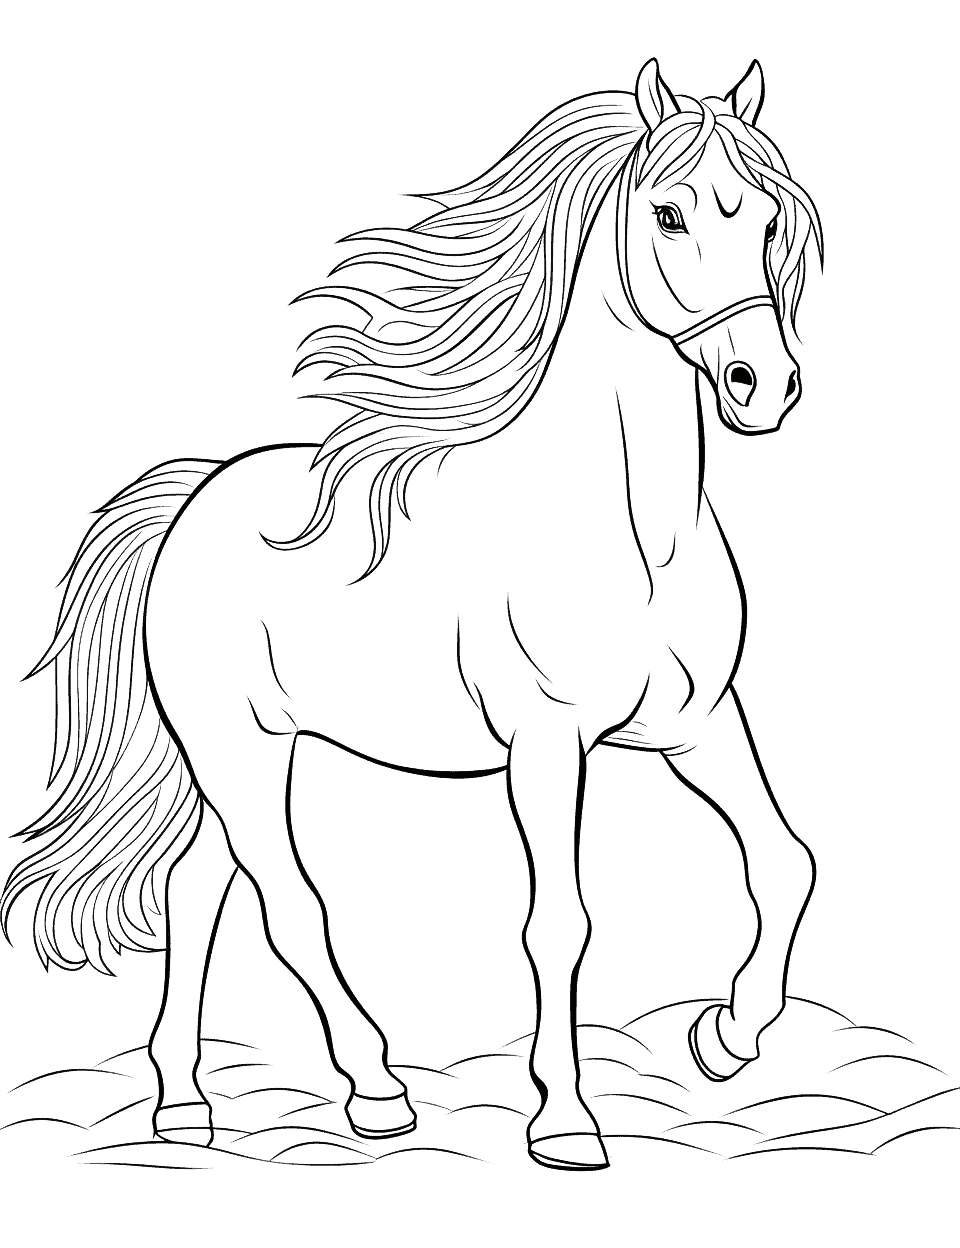 Graceful Friesian Horse Coloring Page - A graceful Friesian horse, its long mane and tail flowing in the wind.